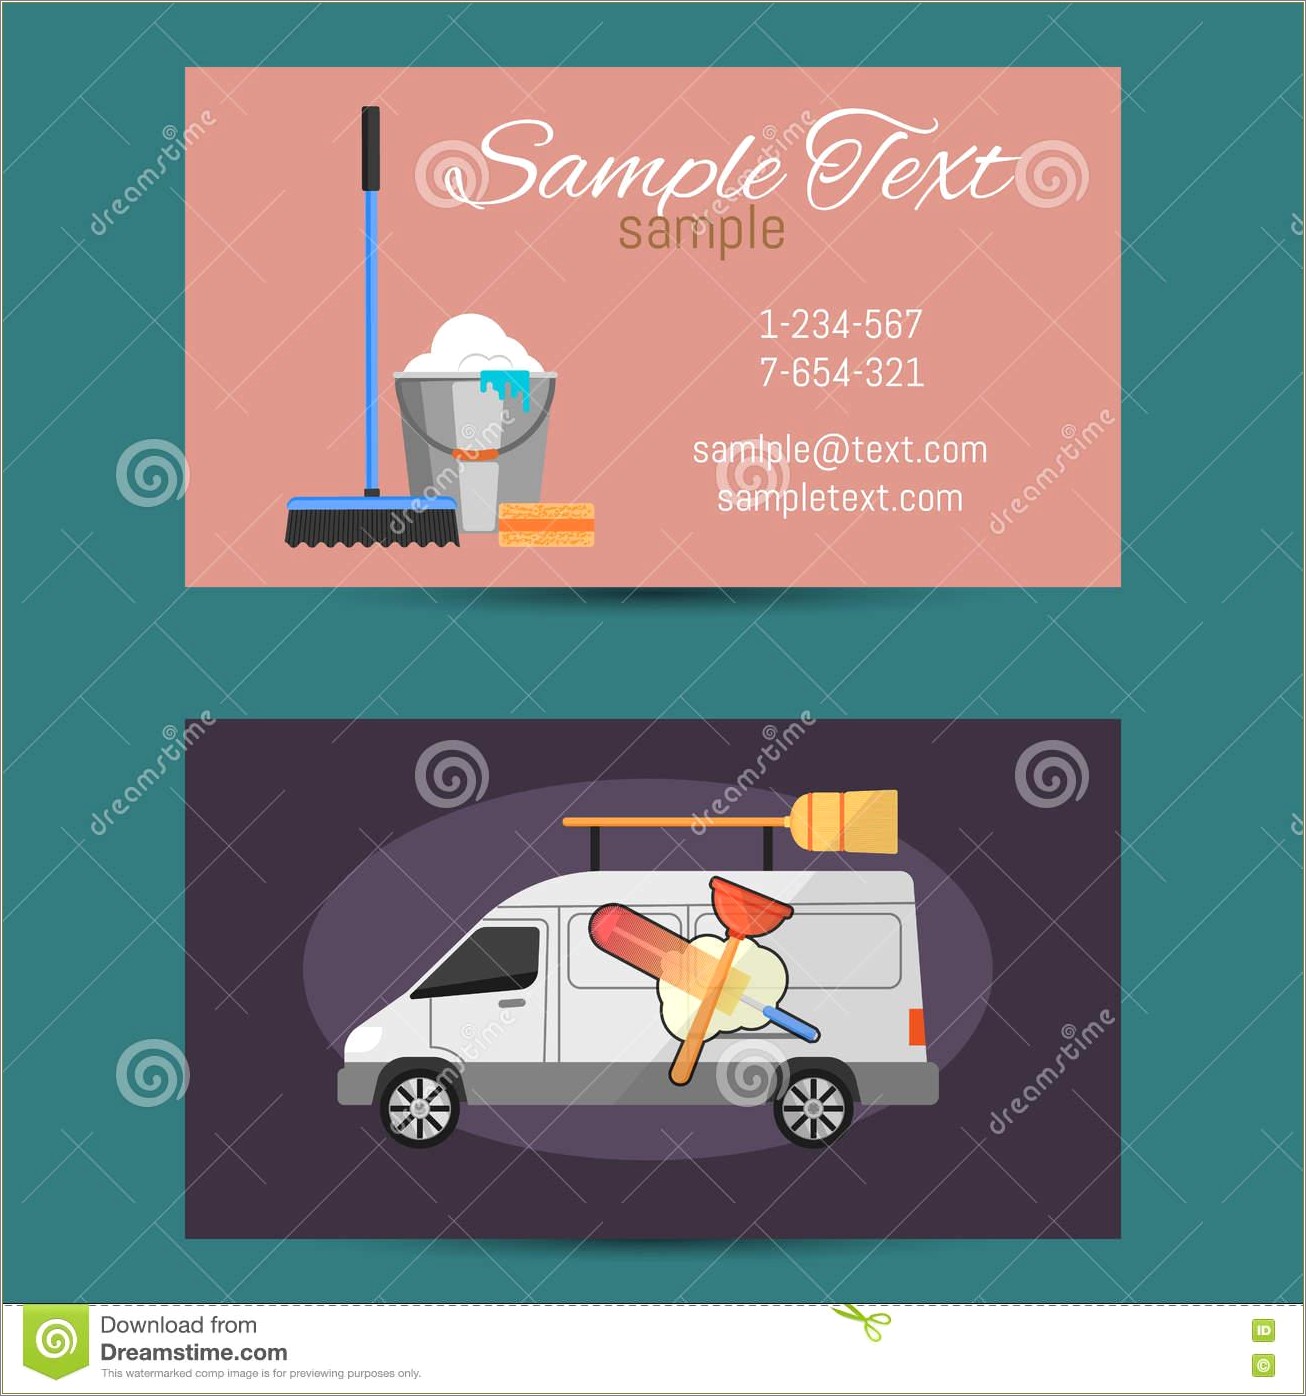 Cleaning Services Name Card Template Free Download